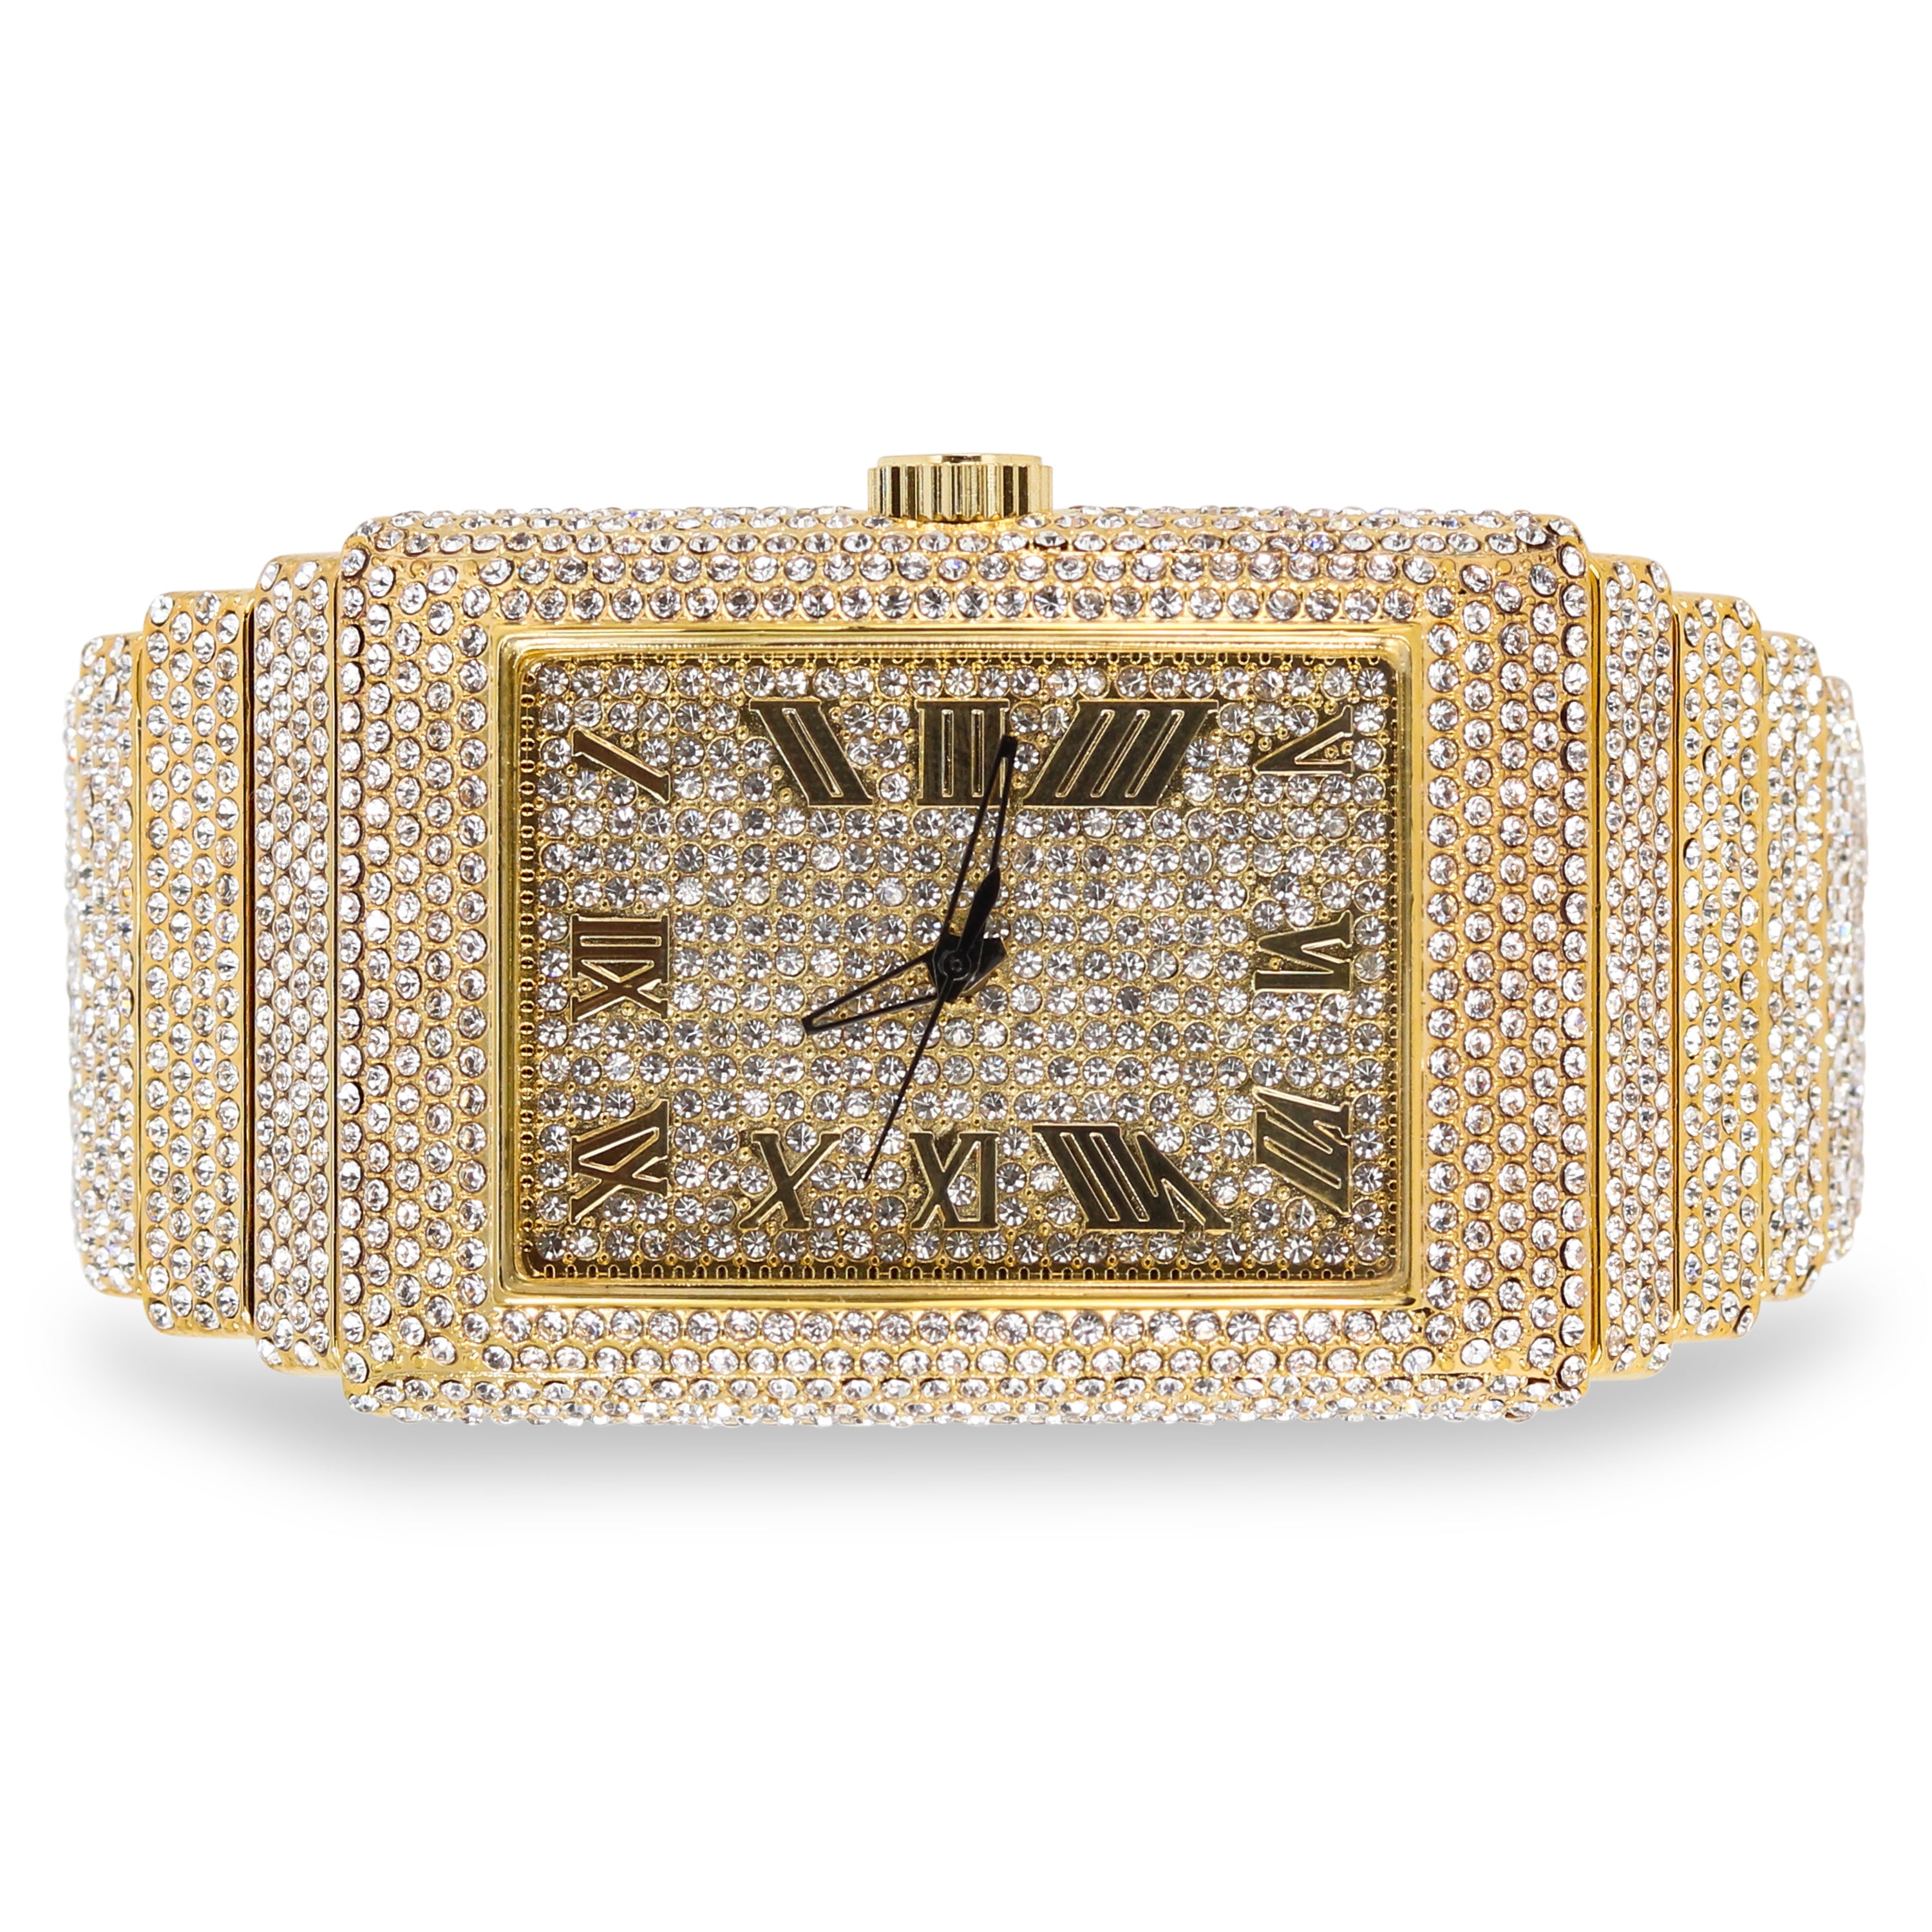 Men's Rectangle Chandelier Watch 40mm Gold - Fully Iced Band